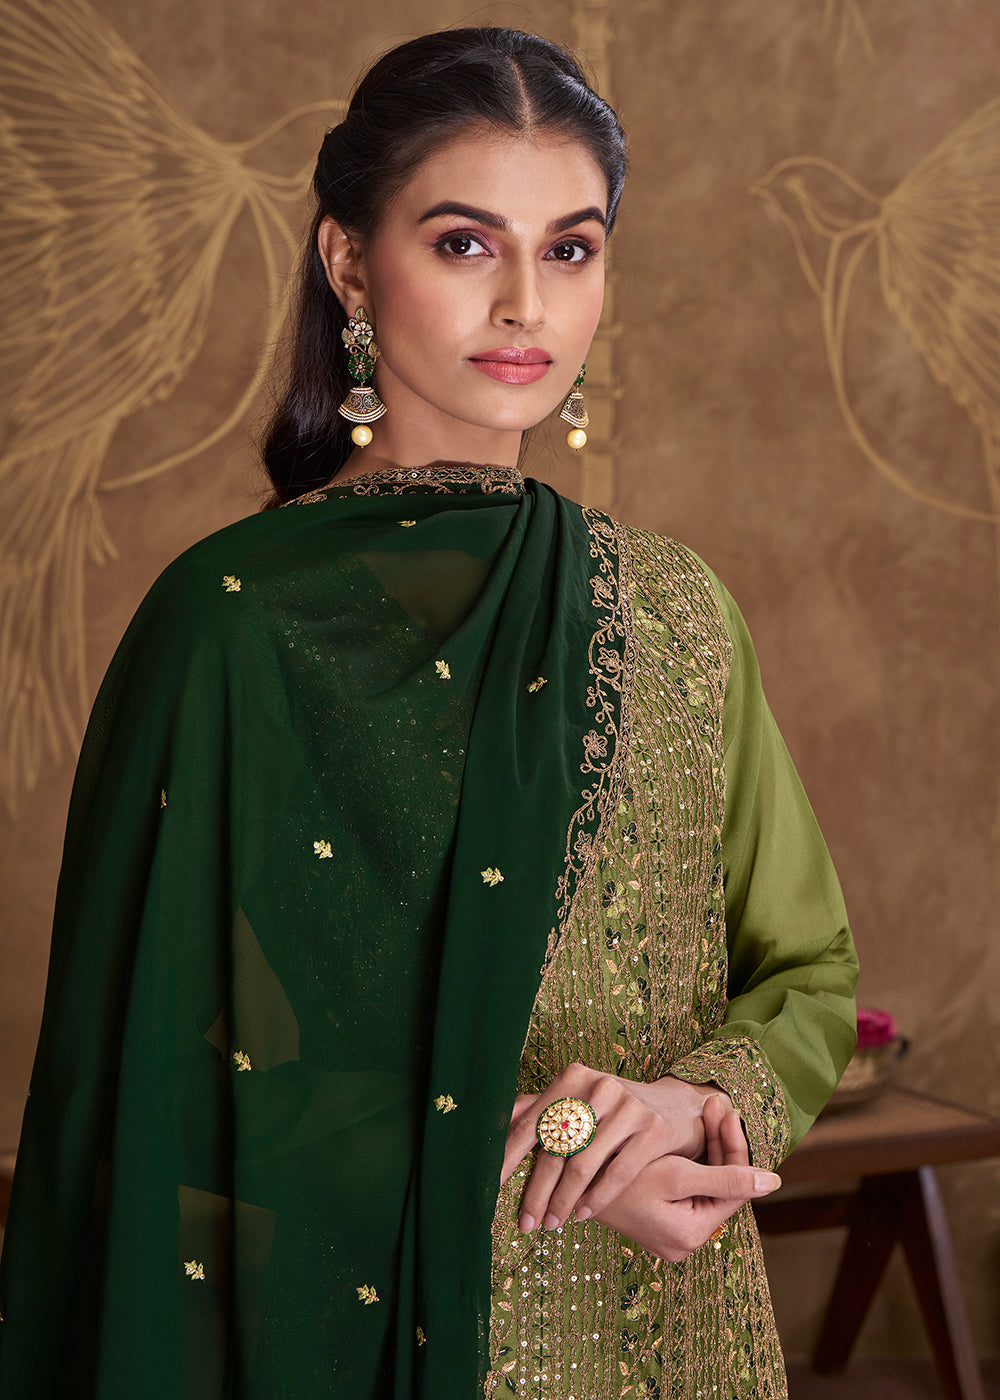 Buy Now Dreamy Green Embroidered Art Silk Festive Pant Style Salwar Suit Online in USA, UK, Canada, Germany, Australia & Worldwide at Empress Clothing. 